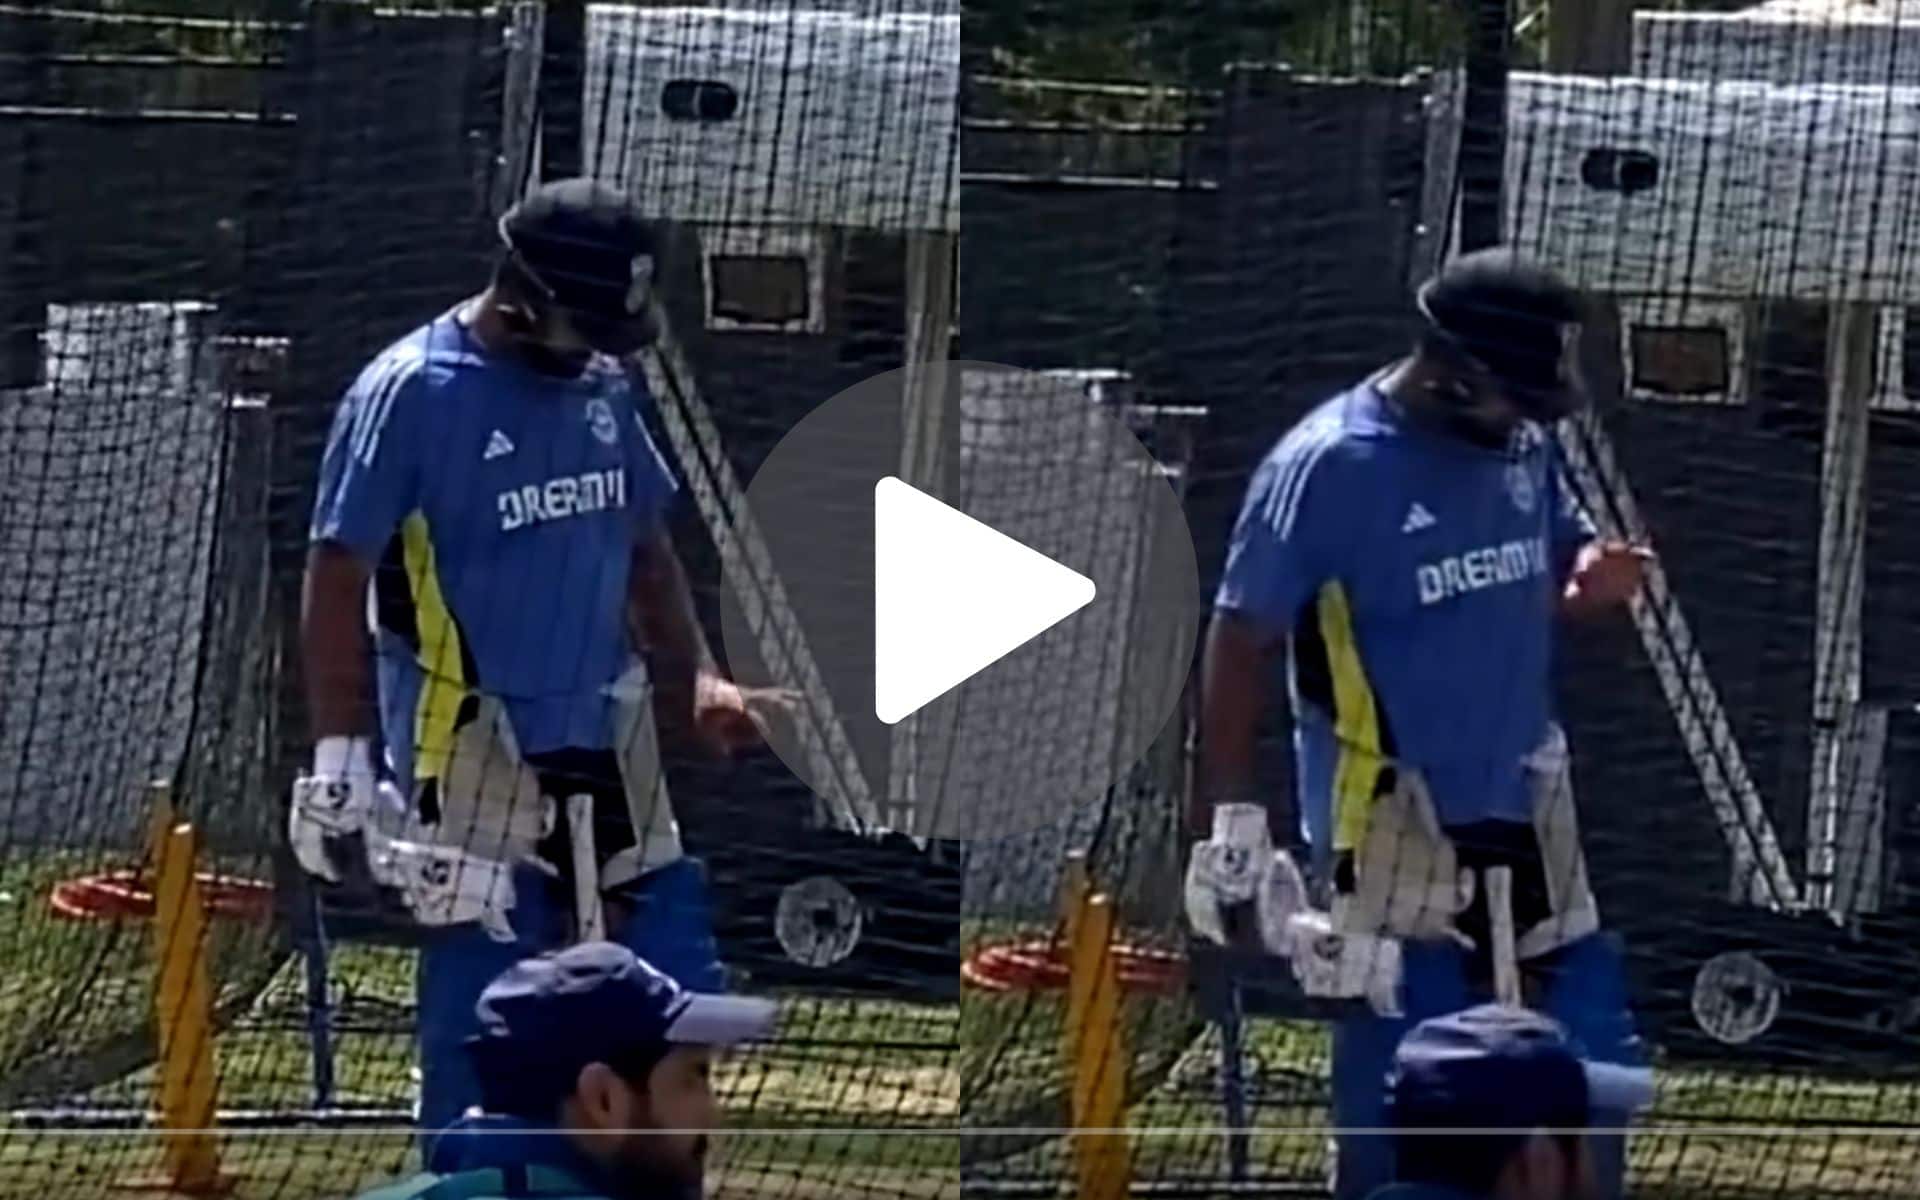 [Watch] Rohit Sharma Suffers Hand Injury Scare In Nets Before IND Vs PAK; Declared Fine Later